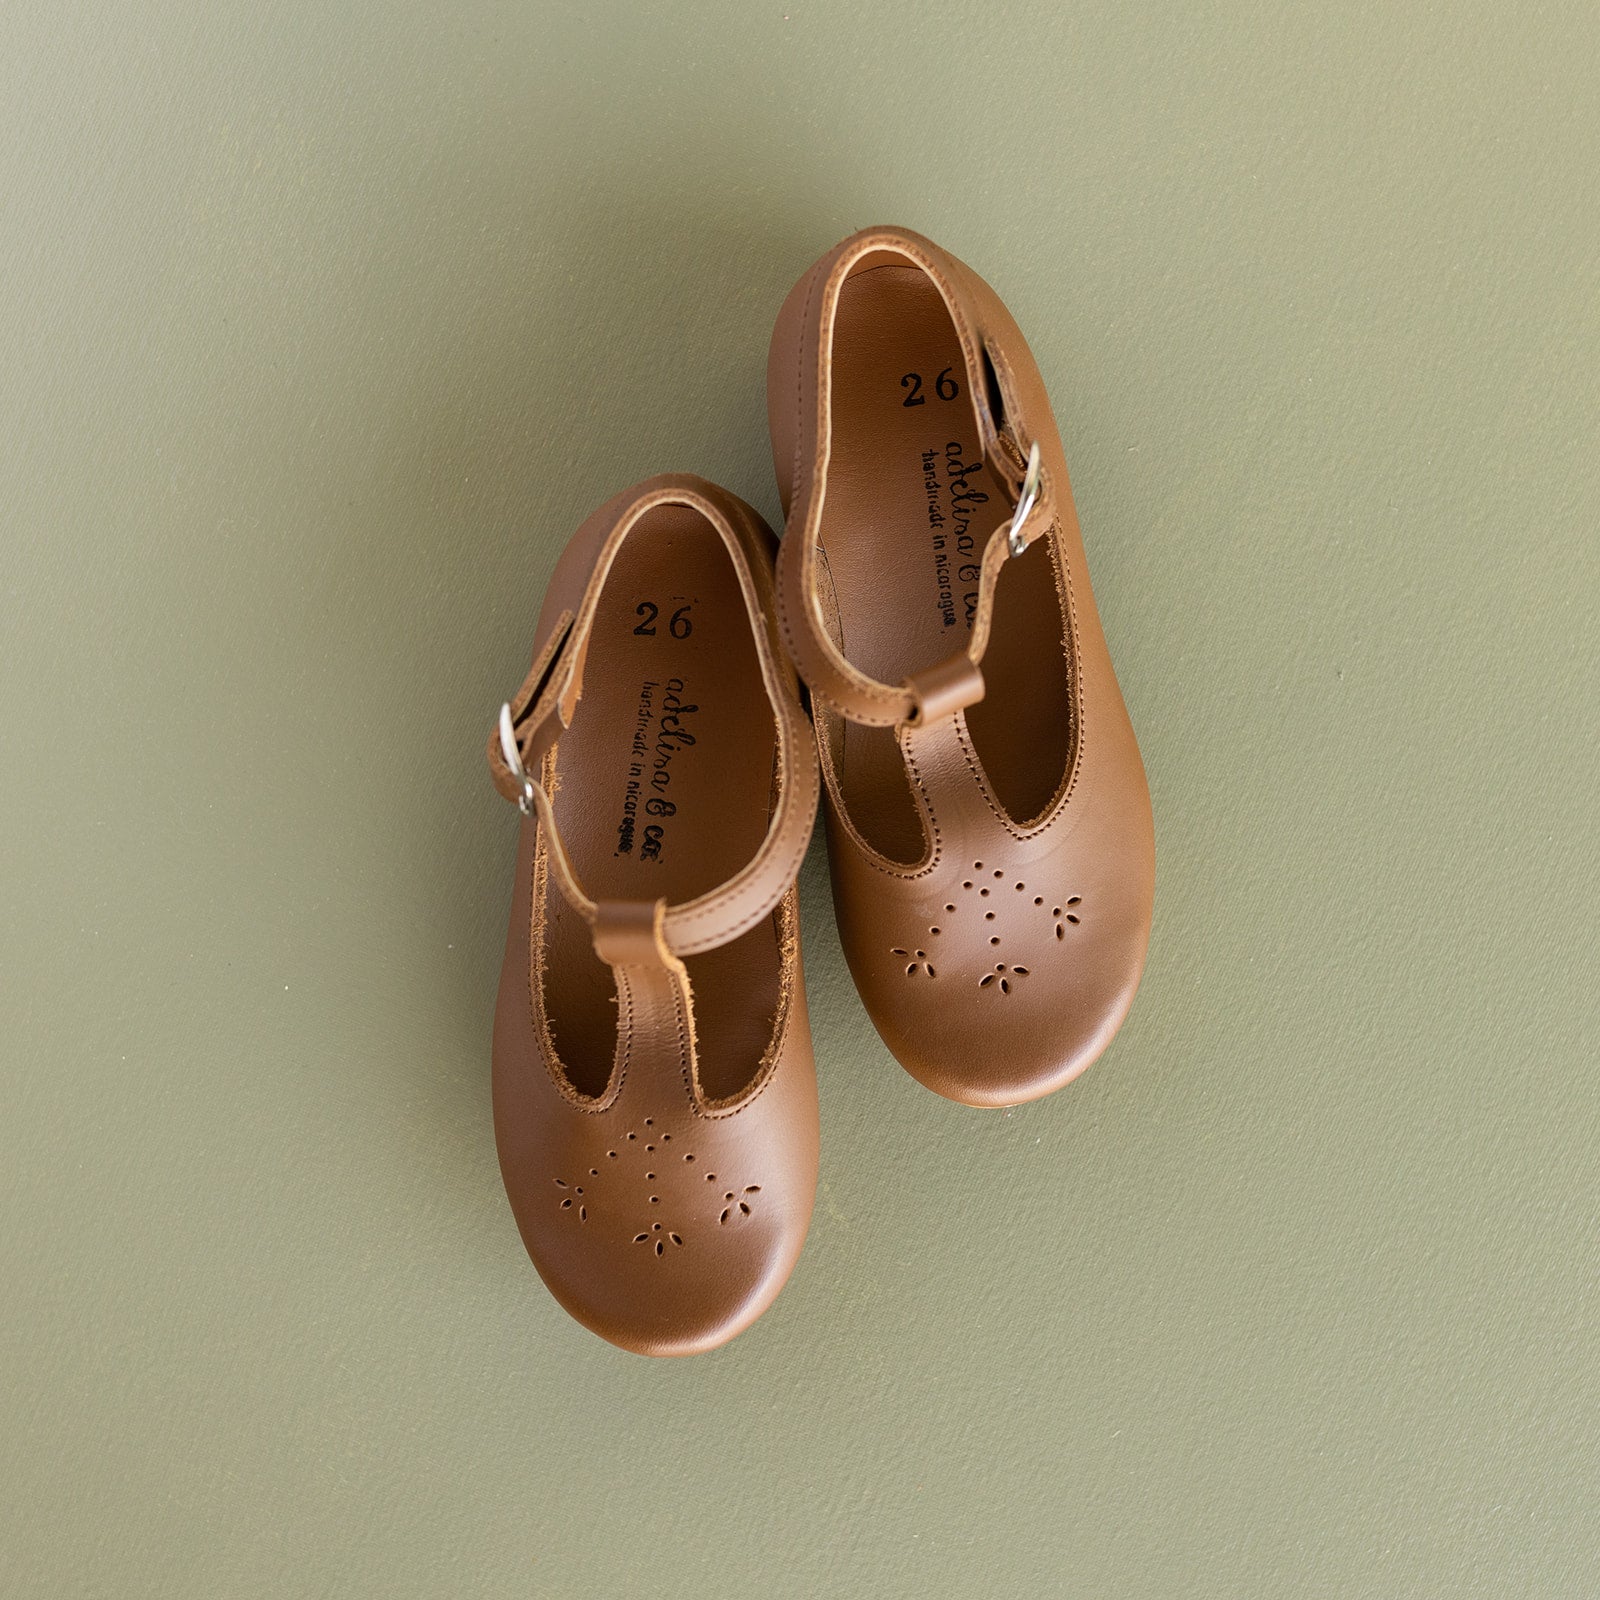 Adelisa & Co t-bar Mary Janes with delicate floral detailing in medium brown leather. These leather Mary Jane shoes for girls are handmade and feature a buckle closure.